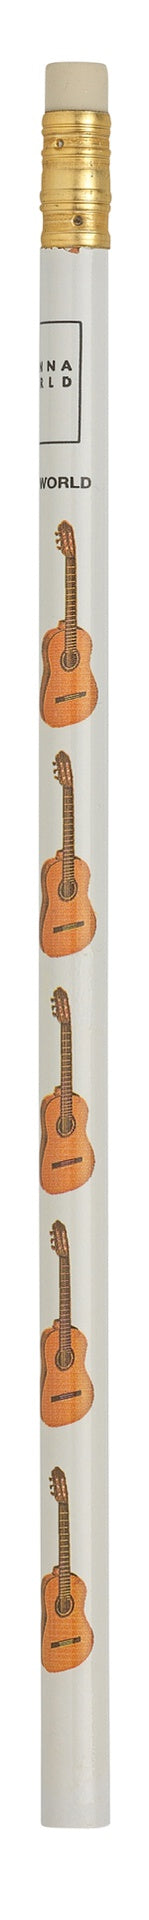 White Pencil with Guitars